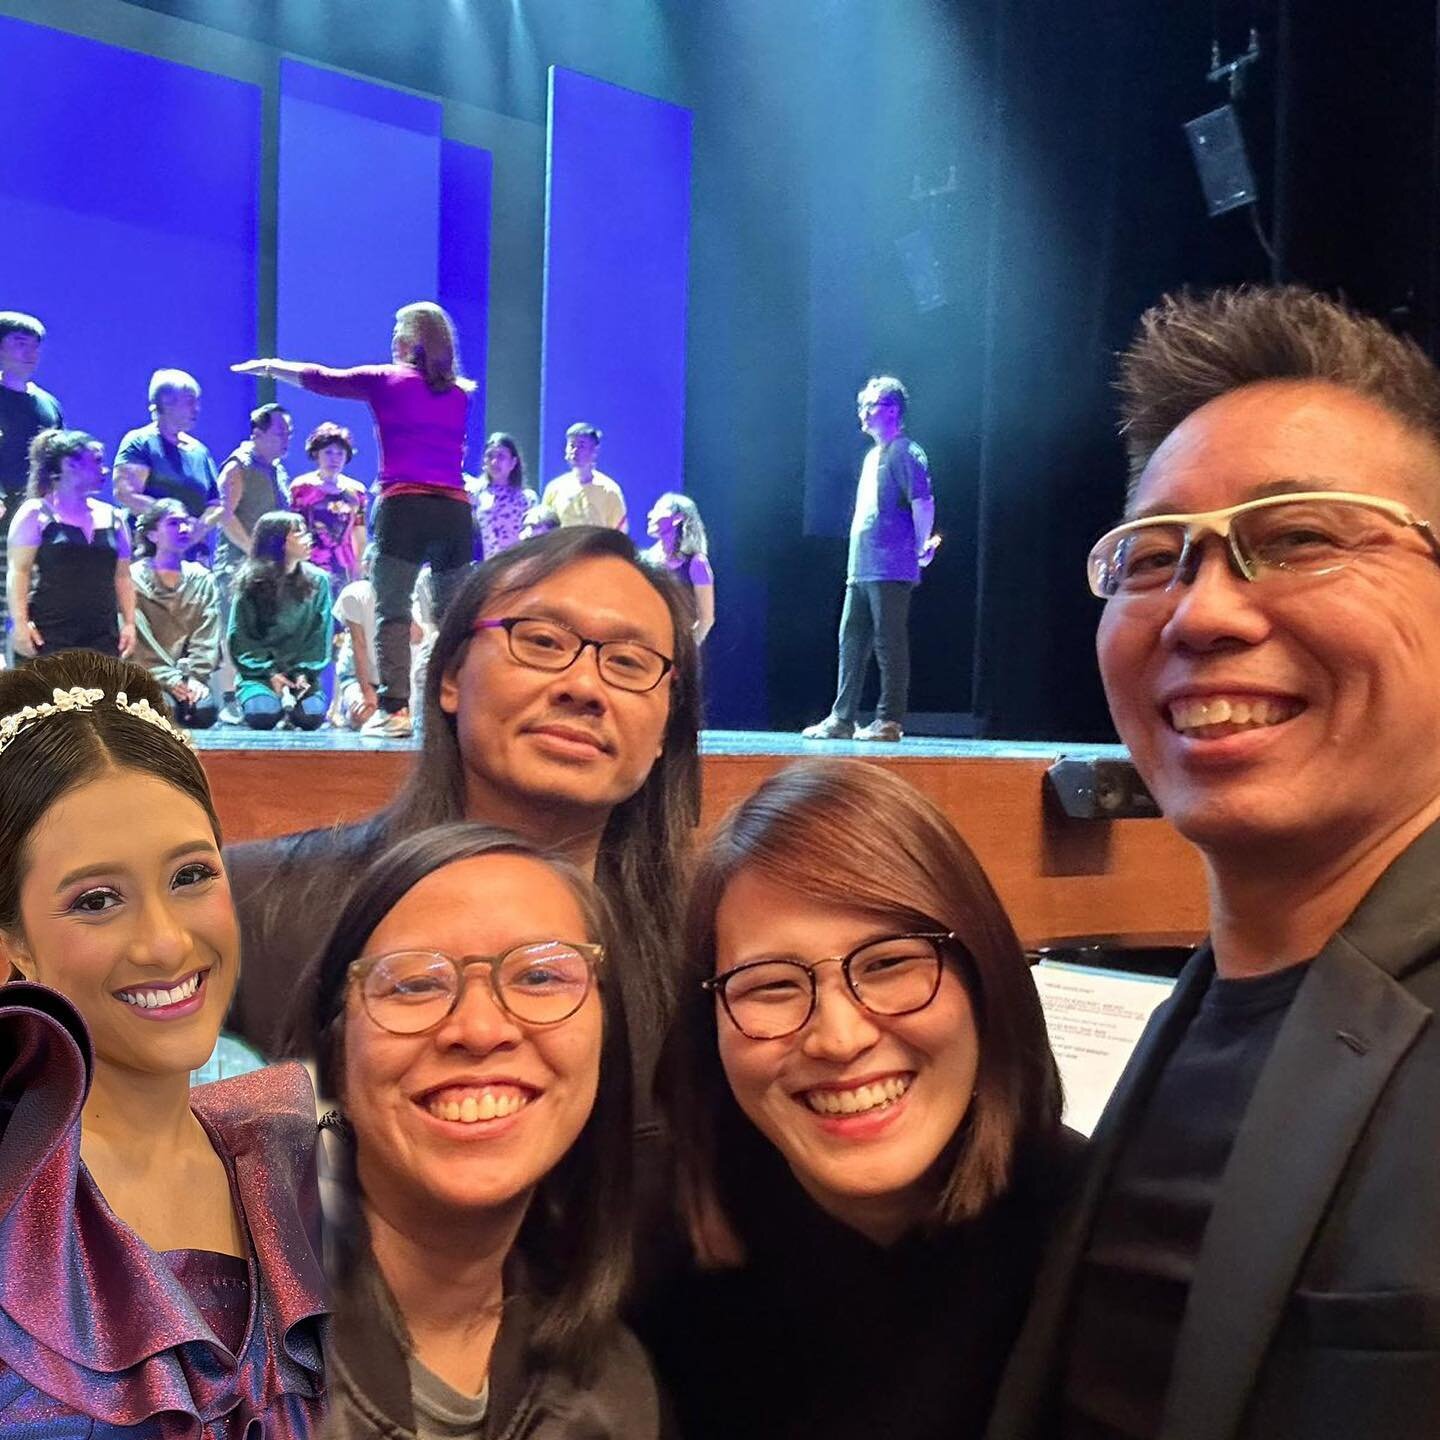 Grateful for the experience to perform with such talented artists! Big thank you to our awesome Music Director @amnimusfirah for her music direction and my wonderful band members @tamagohdrummer @bassloft @irenataib ! Nothing beats making music with 